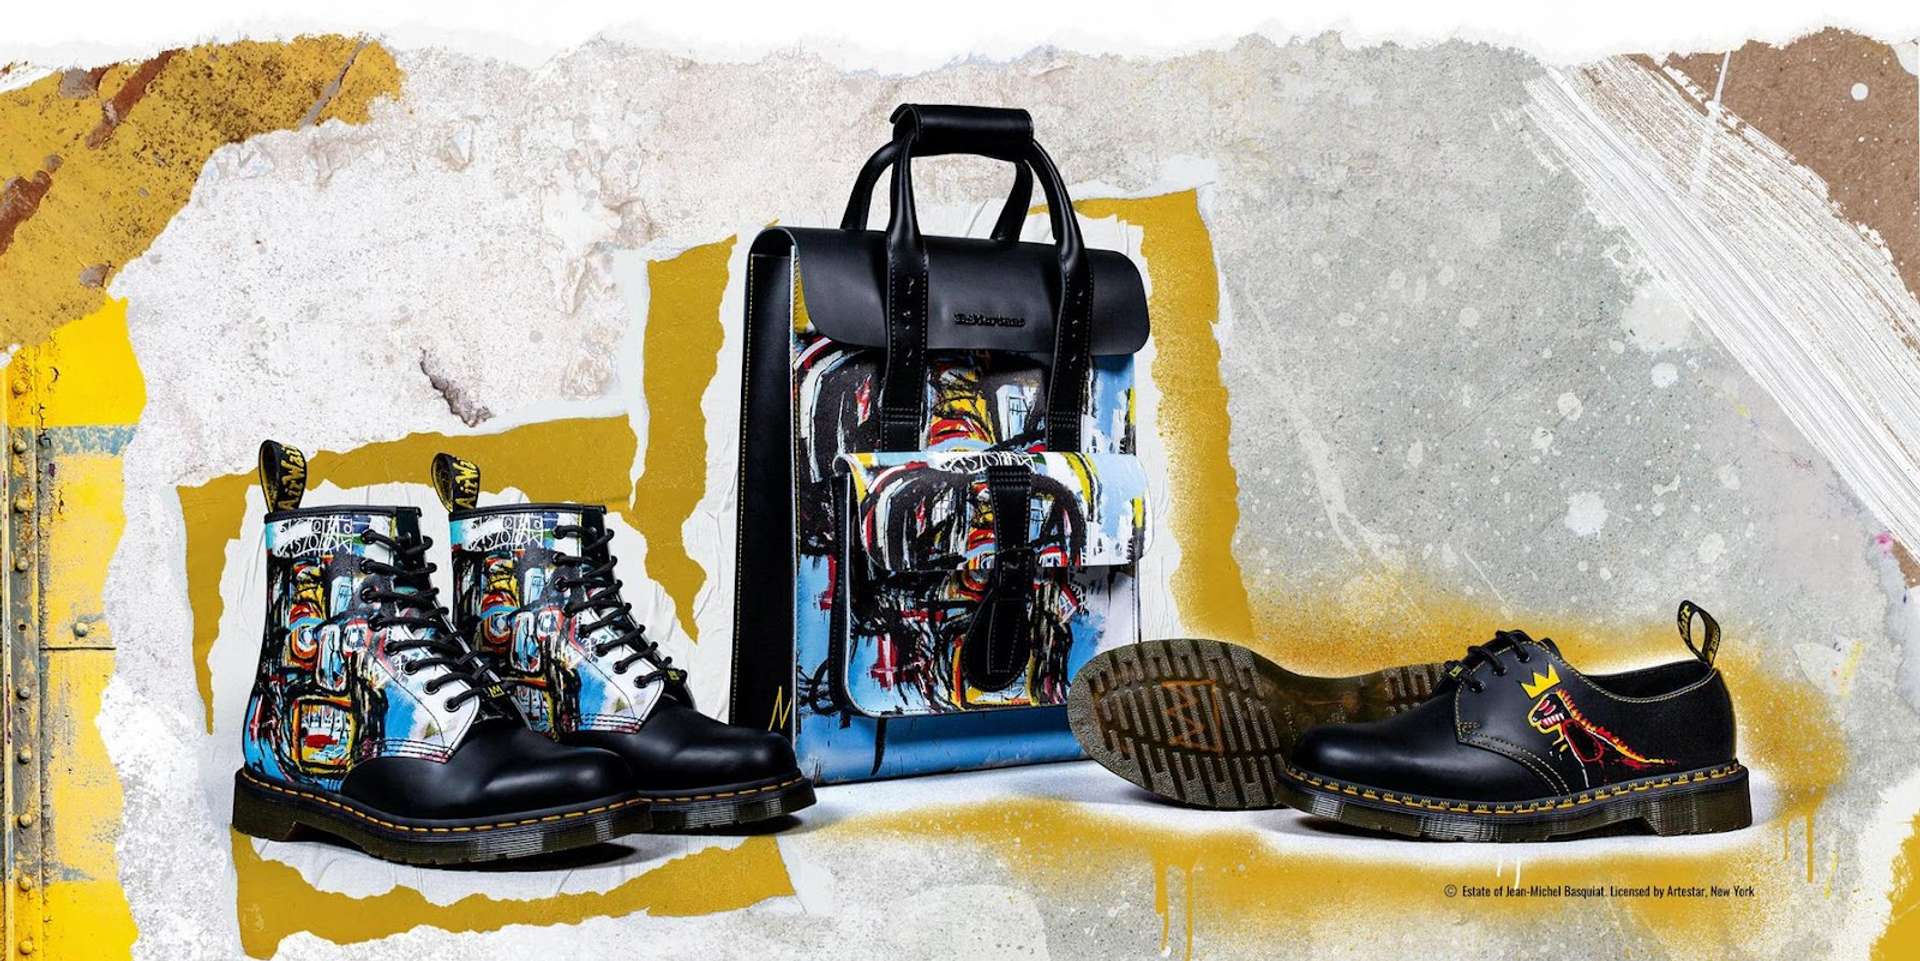 A collage of three items from Basquiat’s collaboration with Doc Martens, against a yellow and beige textured background.